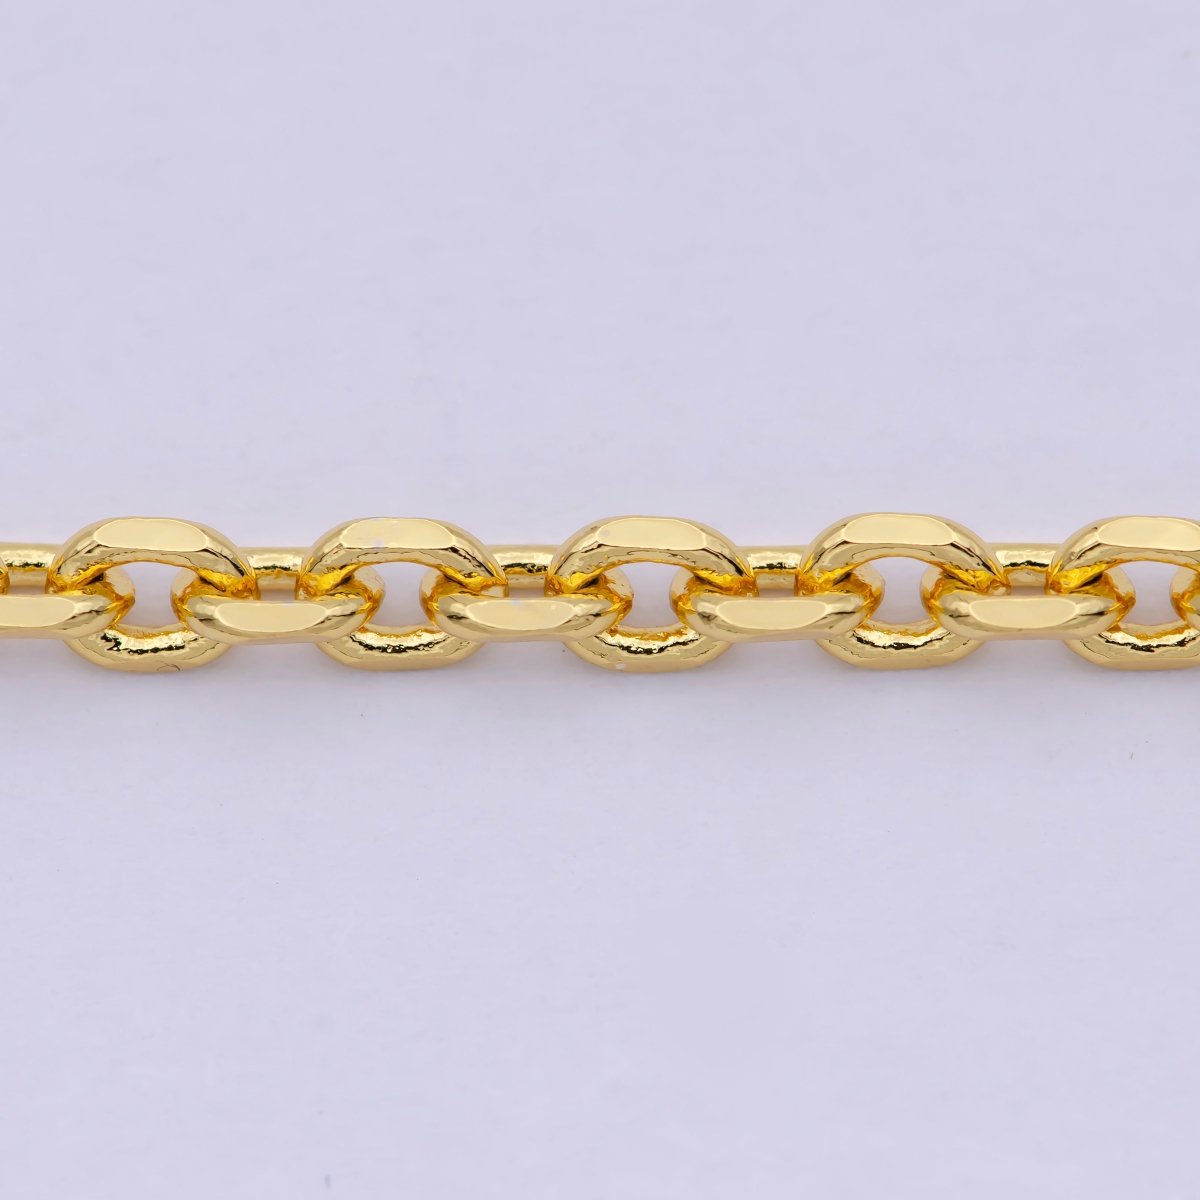 3.26 mm Cable Chain | Gold Filled Cable Necklace | Unisex Men Woman Necklace 17.7 inch | WA-796 Clearance Pricing - DLUXCA